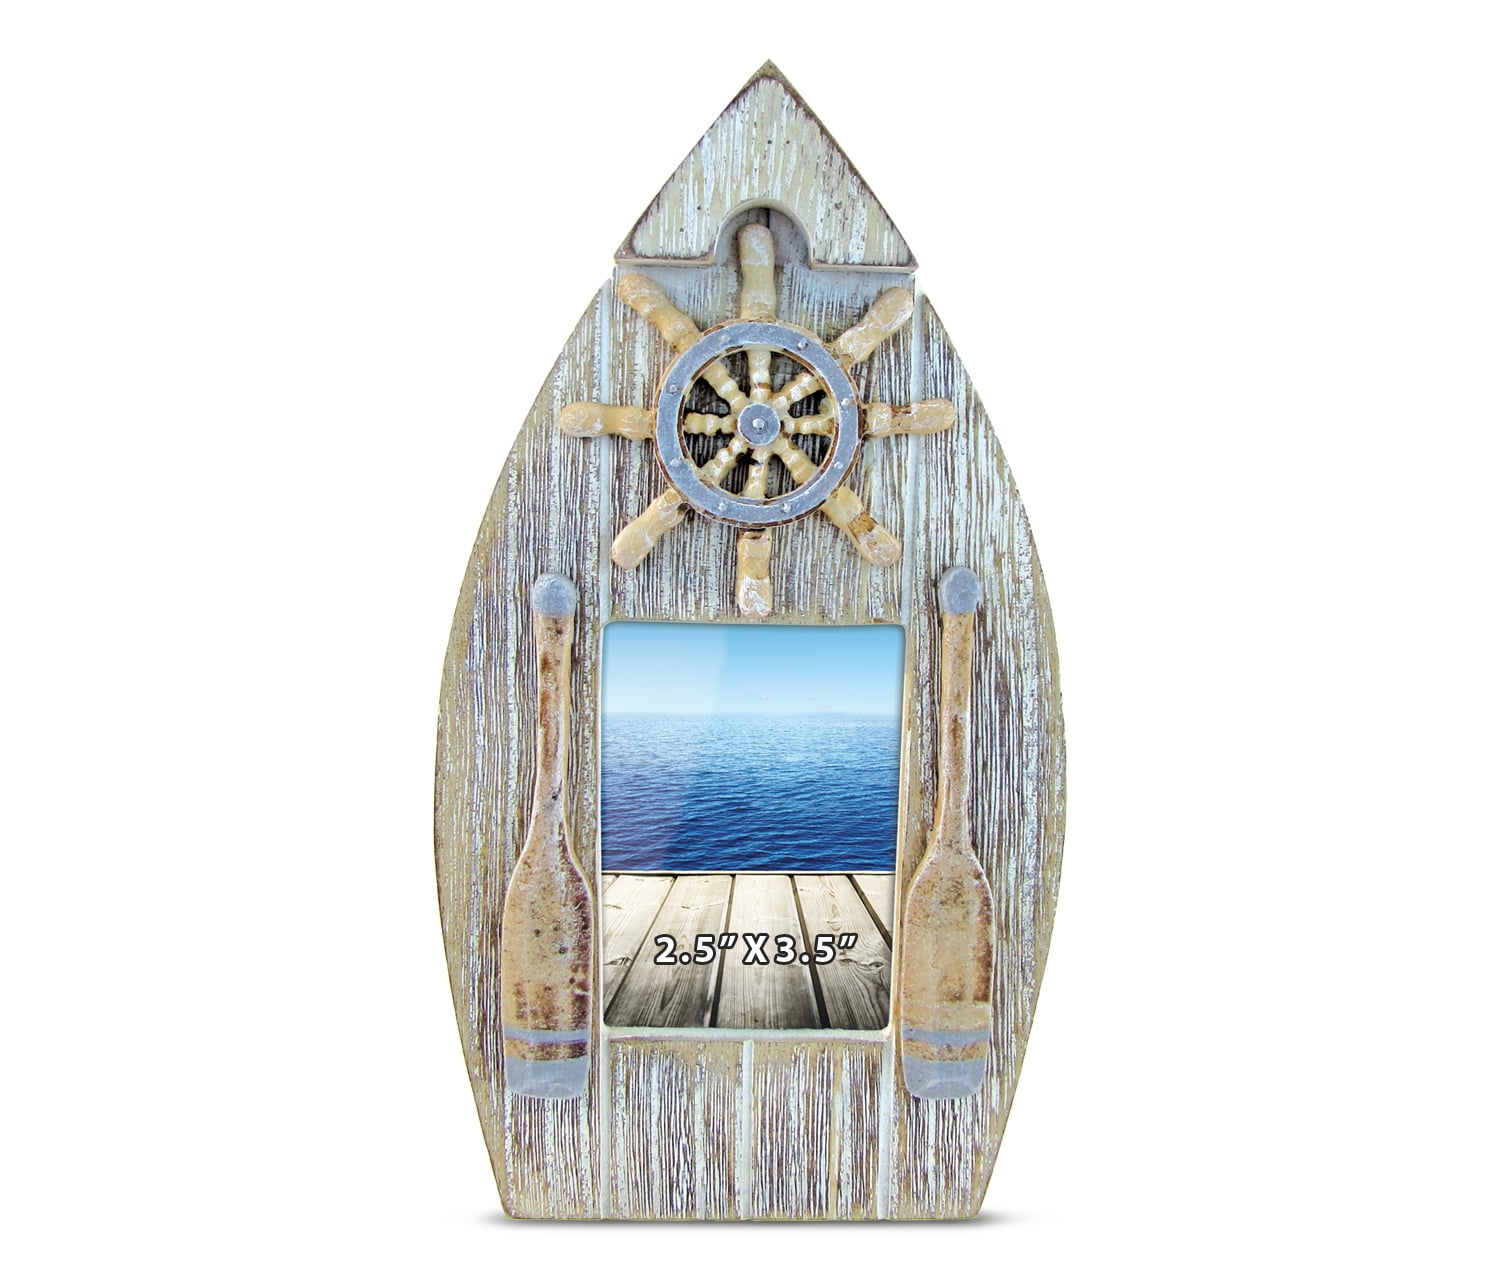 3D Sail Boat Decoration Rustic Finish Handcrafted For Tabletops Office Family Desktop Accent Accessory Puzzled Relax 3.5 x 5 Distressed Wooden Beach Picture Frame Nautical Coastal Themed Home Decor